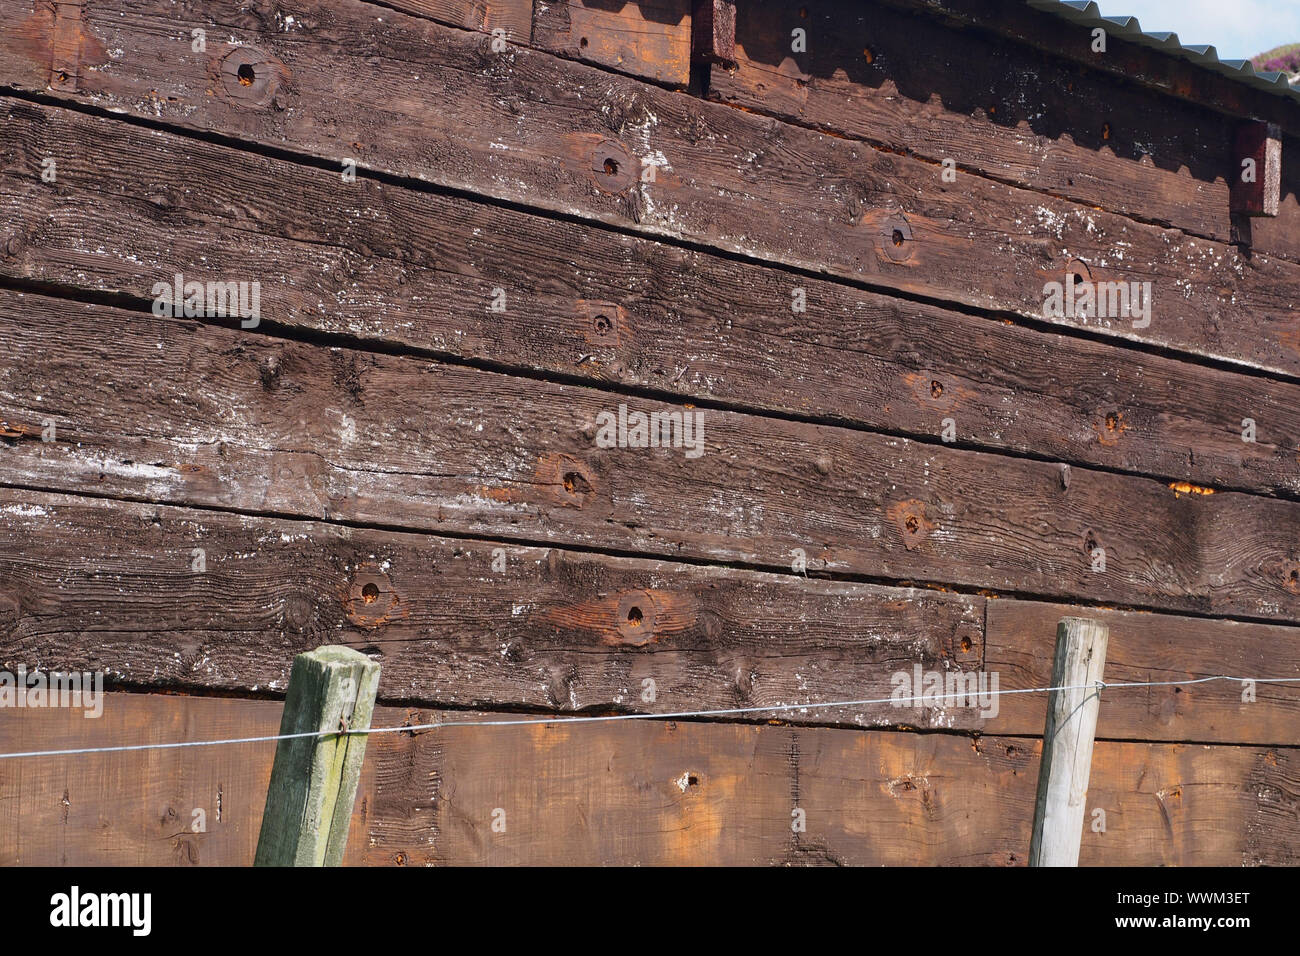 A close up view of reclaimed timber reused to build a timber barn showing the old bolt holes, the grain and thickness and quality of the timber boards Stock Photo